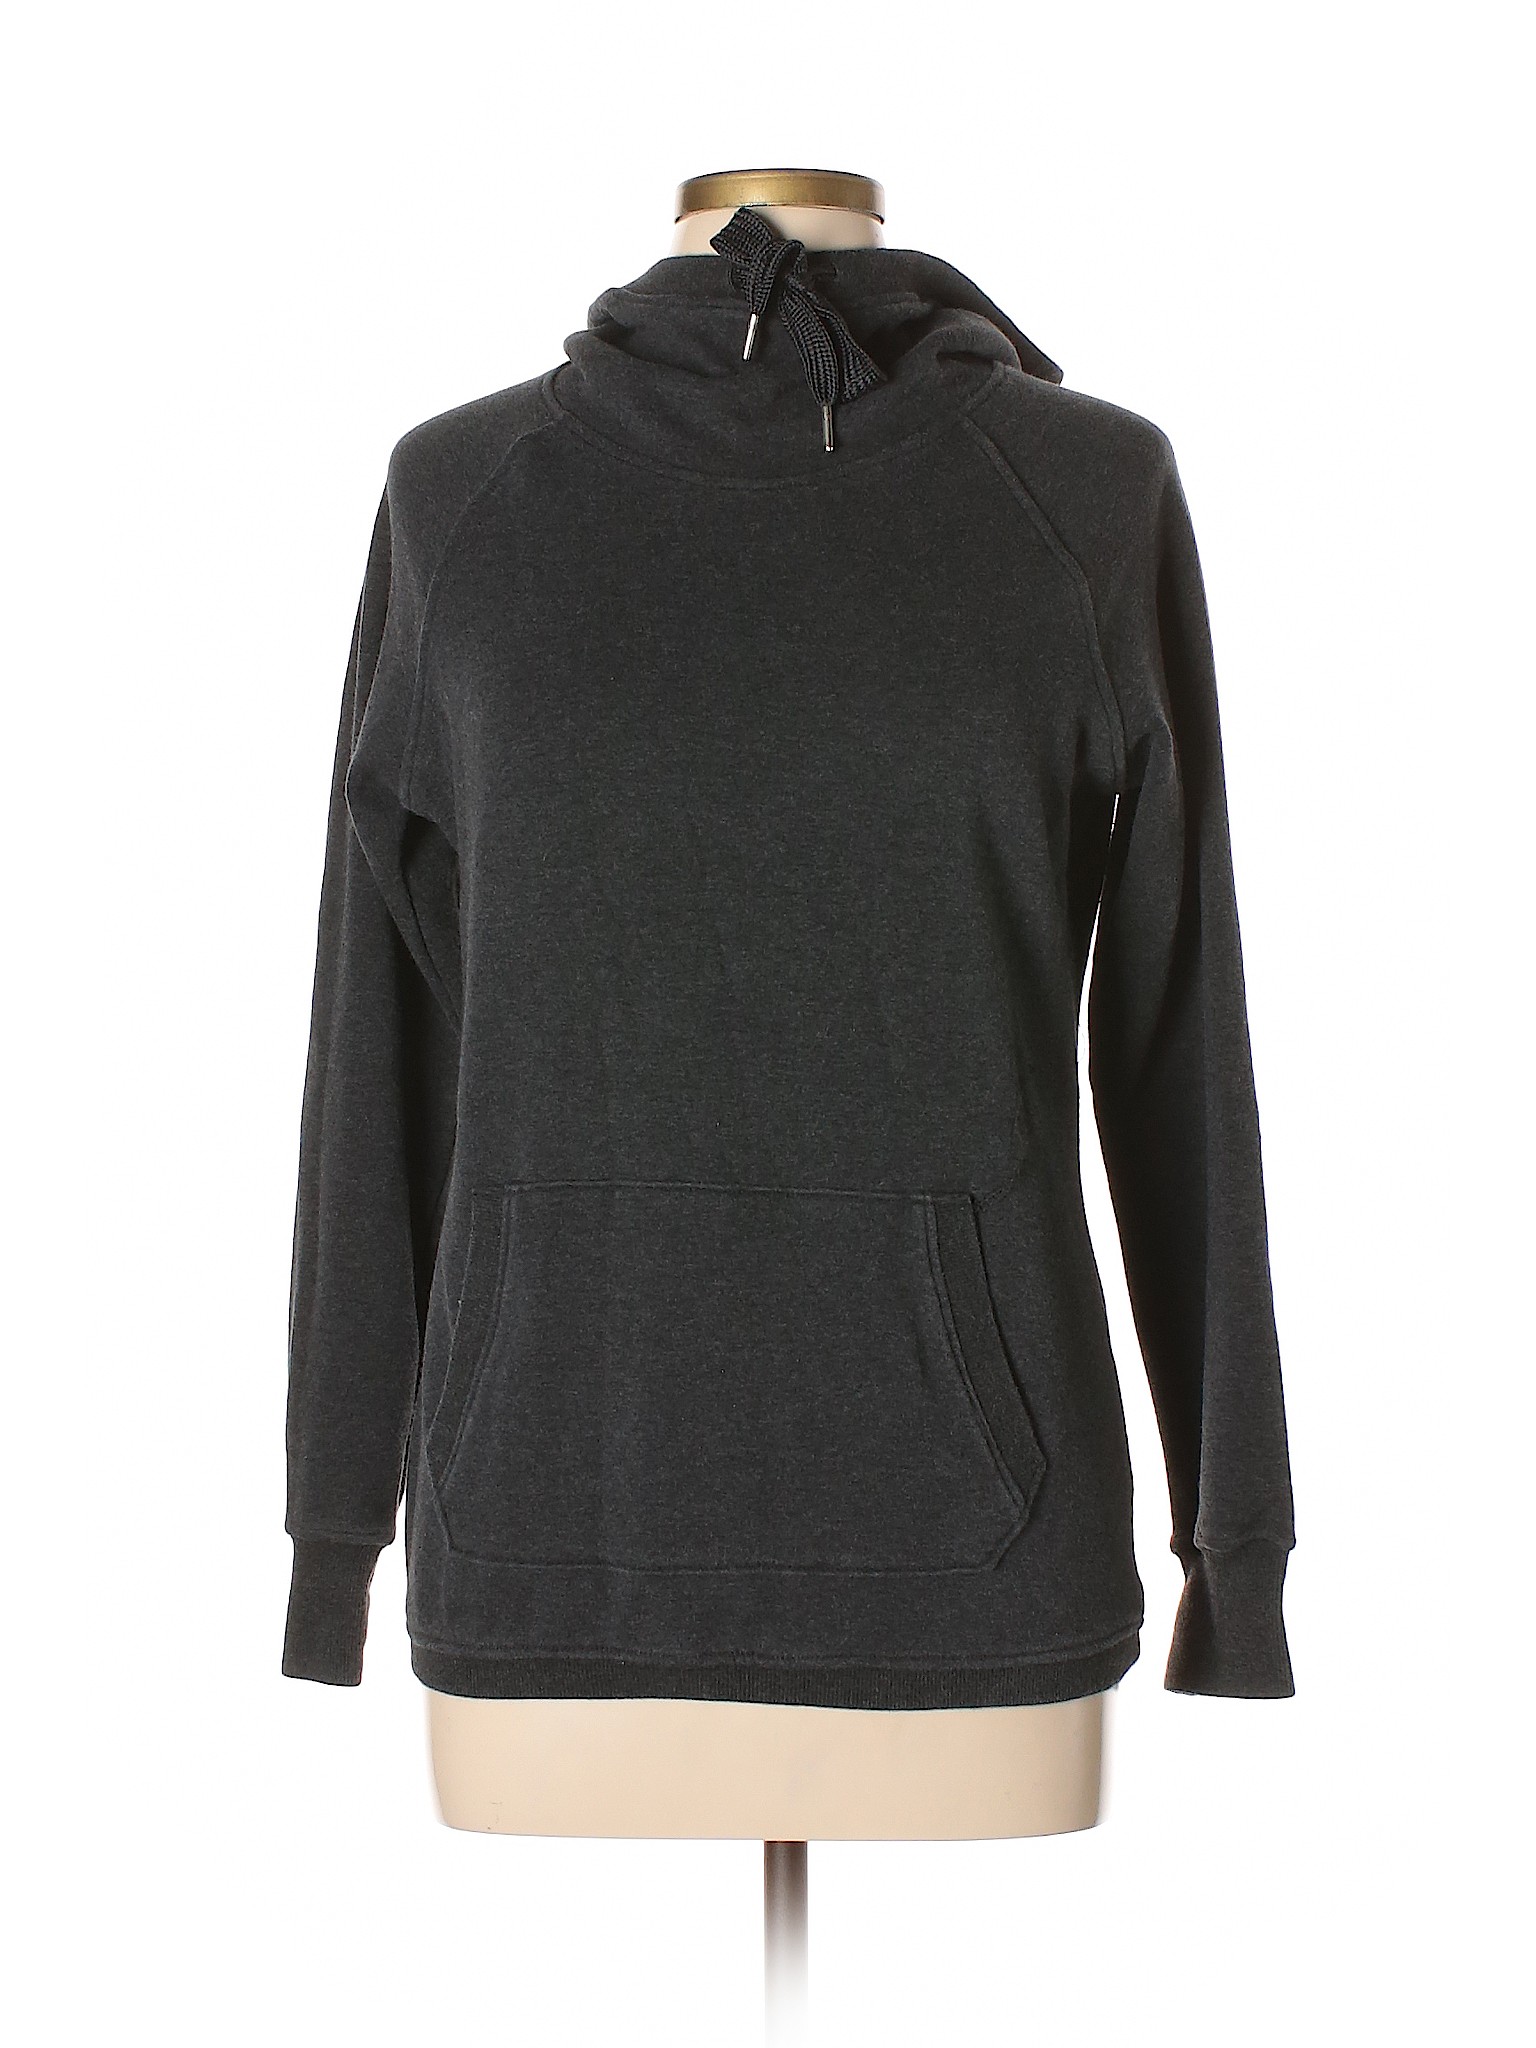 90 Degree by Reflex Solid Gray Pullover Hoodie Size M - 75% off | thredUP